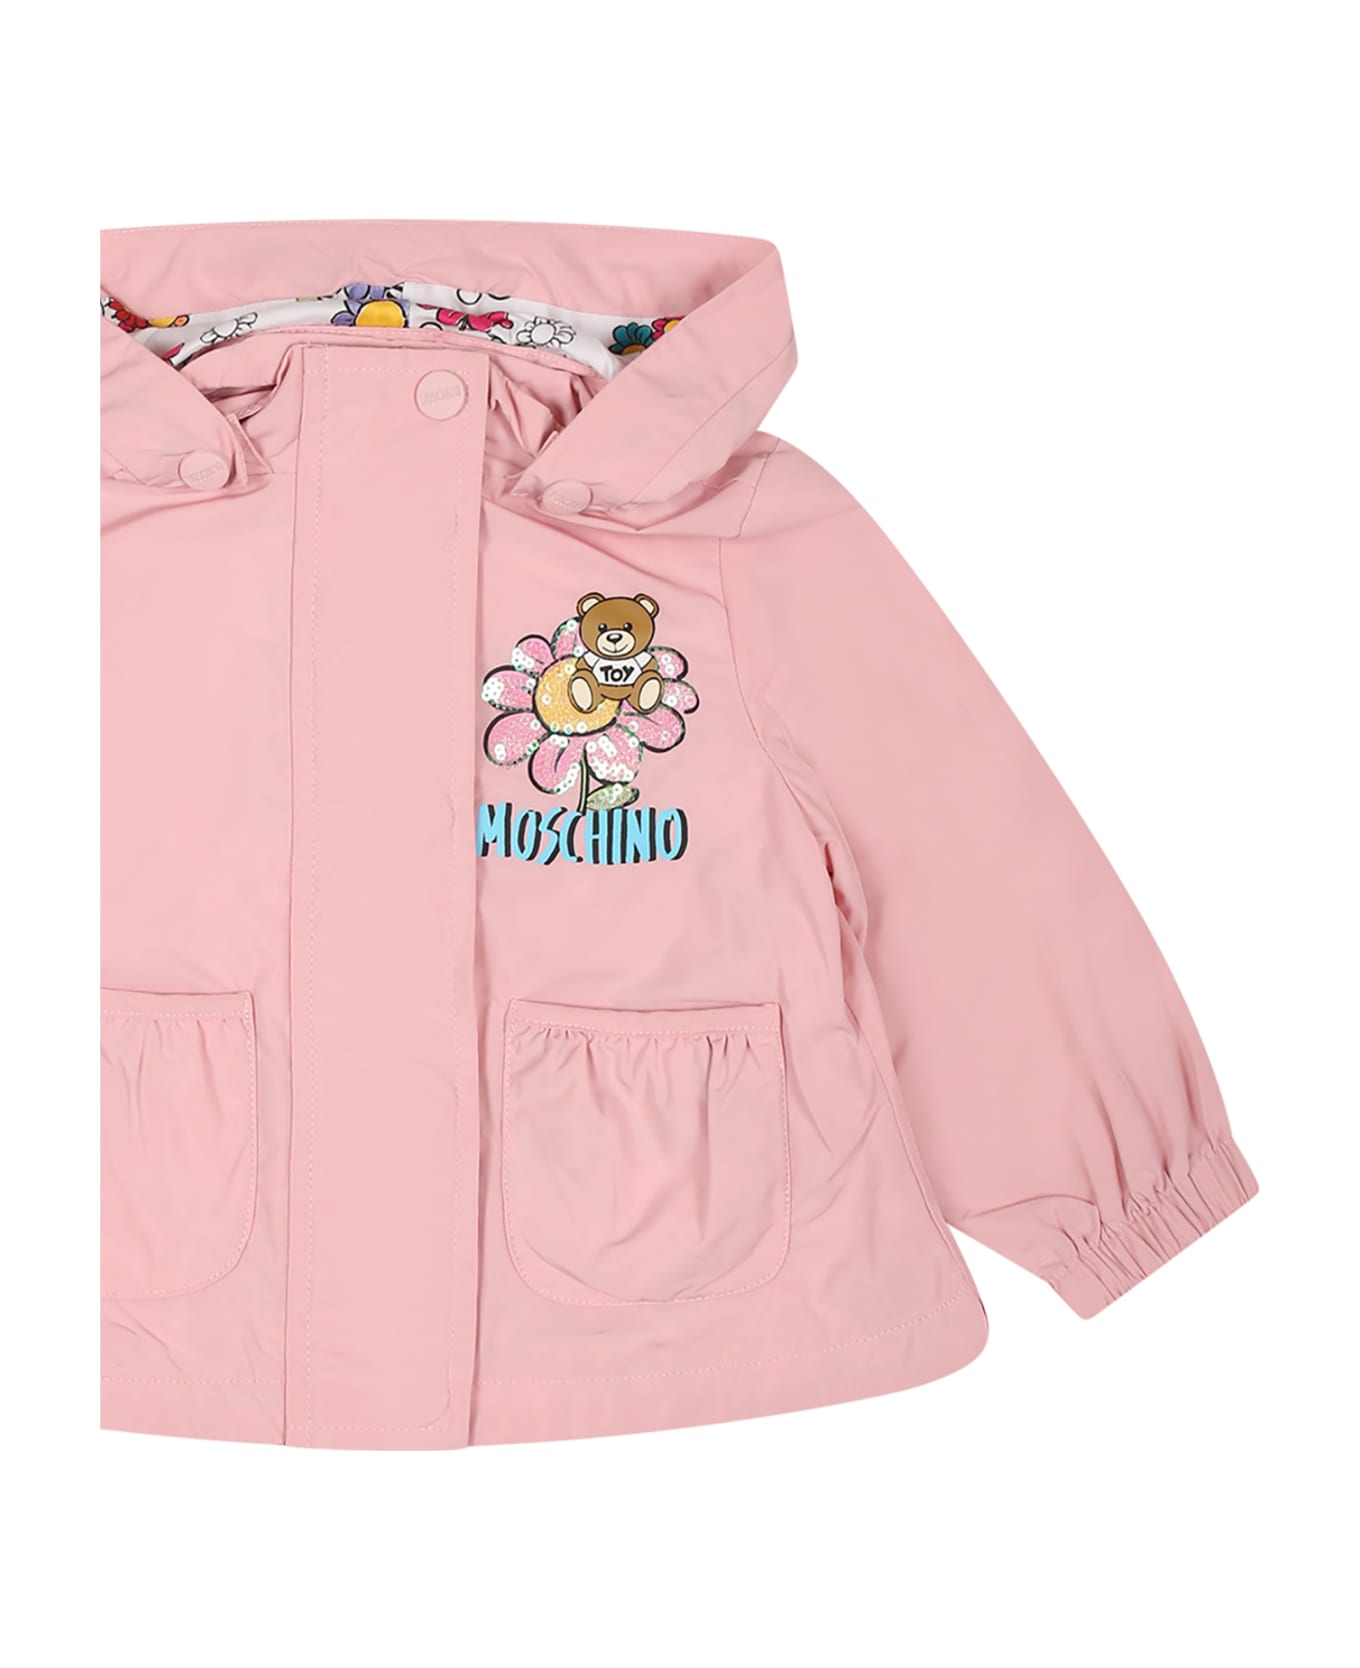 Moschino Pink Raincoat For Baby Girl With Teddy Bear And Logo - Pink